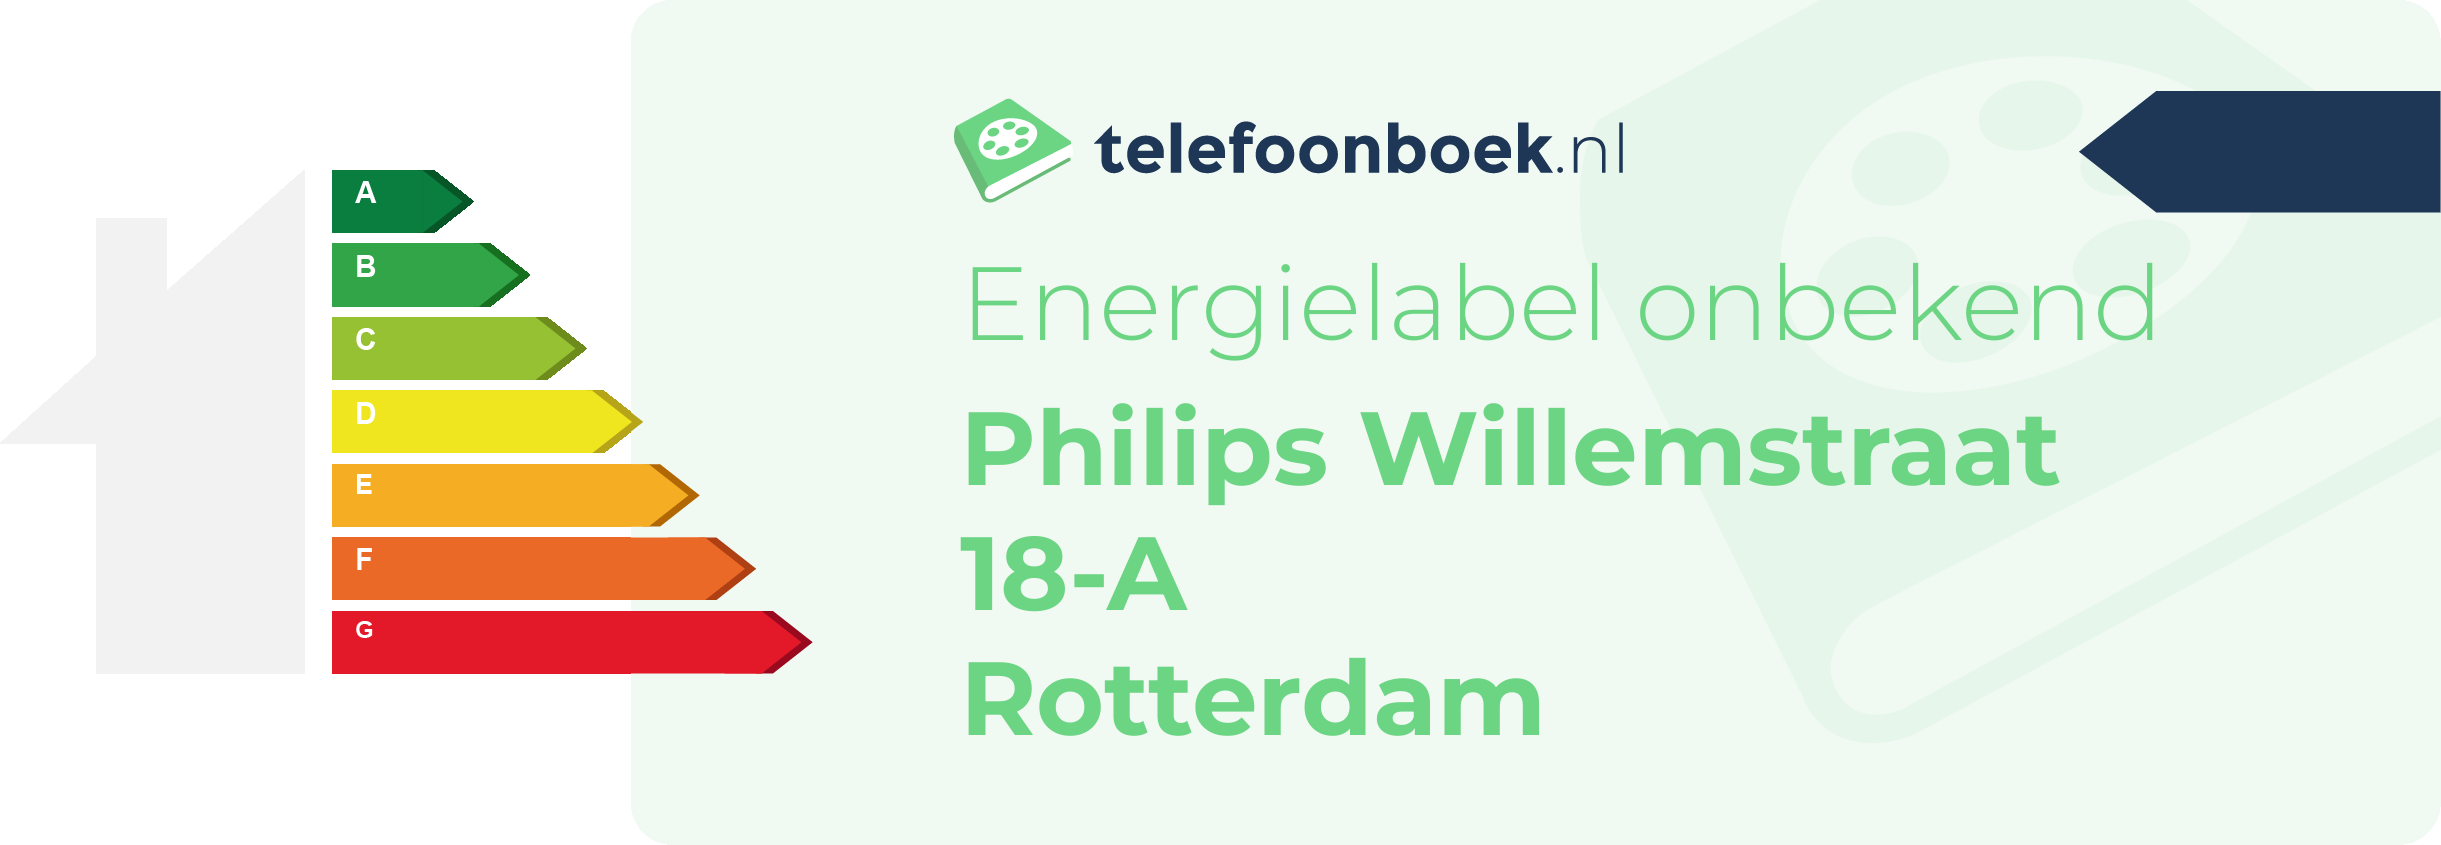 Energielabel Philips Willemstraat 18-A Rotterdam